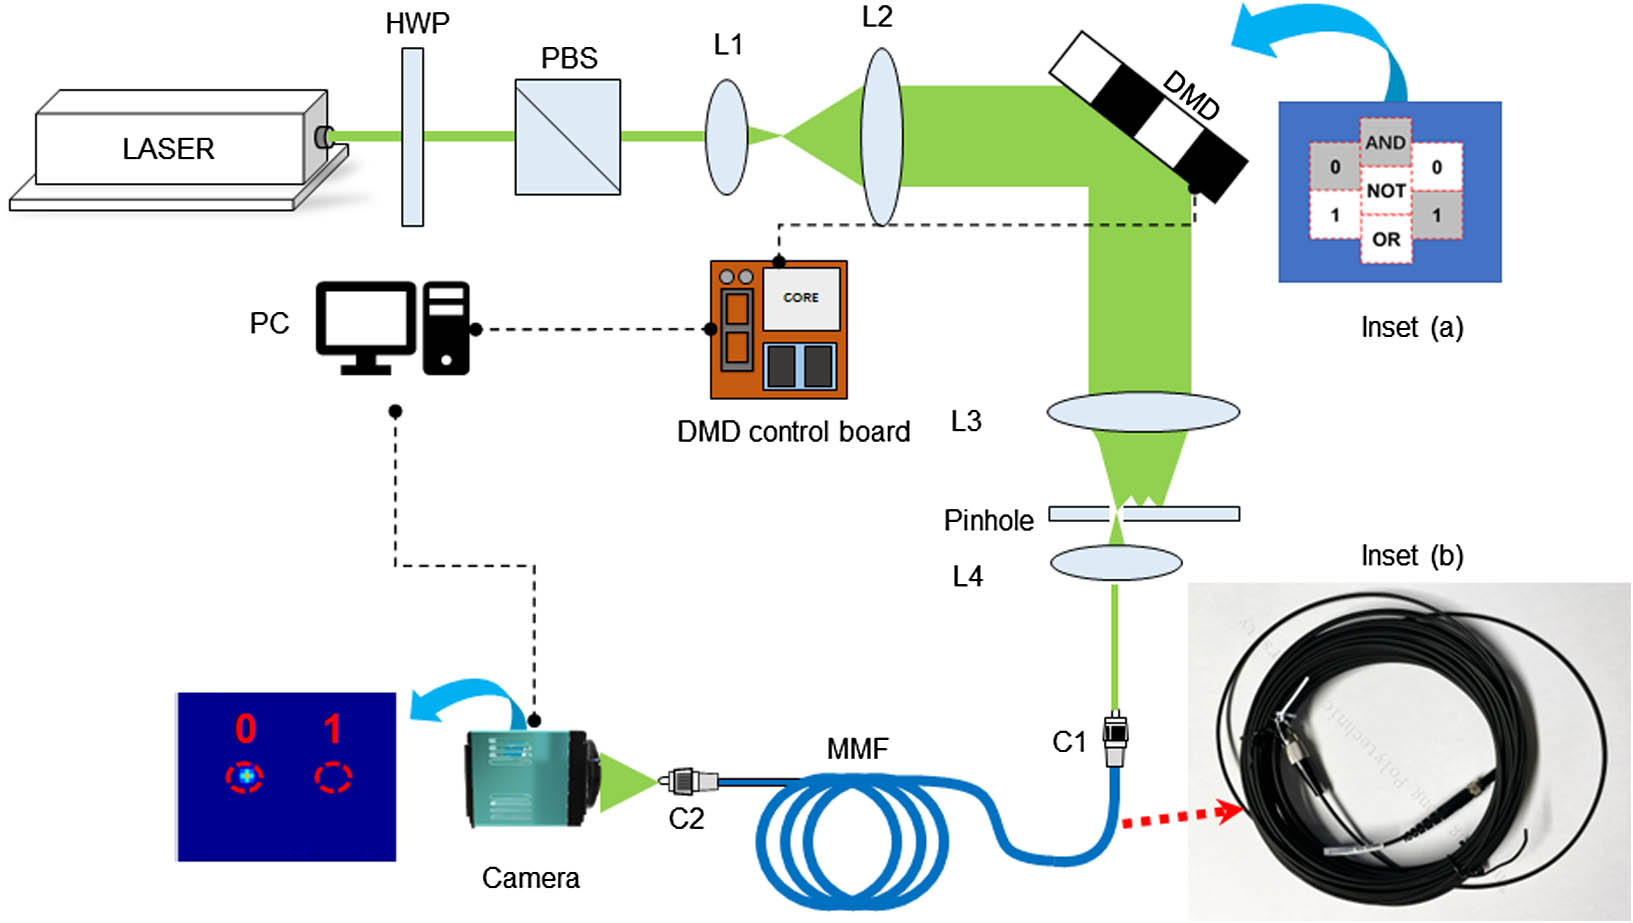 Optical setup. C1, C2, collimator; DMD, digital micromirror device; HWP, half wave plate; L1–L4, lens; MMF, multimode fiber; PBS, polarization beam splitter. The figure presents a logic output state of “0” (the “0” position at the output plane, as sensed by the camera, sees an optical focus) for logic operation “0·1” (with DMD subregions 0, AND, and 1 being selected and activated), with “·” representing “AND” logic type. Inset (a) illustrates the arrangement of subregions on the DMD. Subregions around the center represent the logic type control units and the binary input digit units; subregions marked in gray represent selected and activated subregions in a specific logic operation; the subregion marked in blue serves as the common reference. Inset (b) is a photograph of the 15-m-long fiber used in this study.